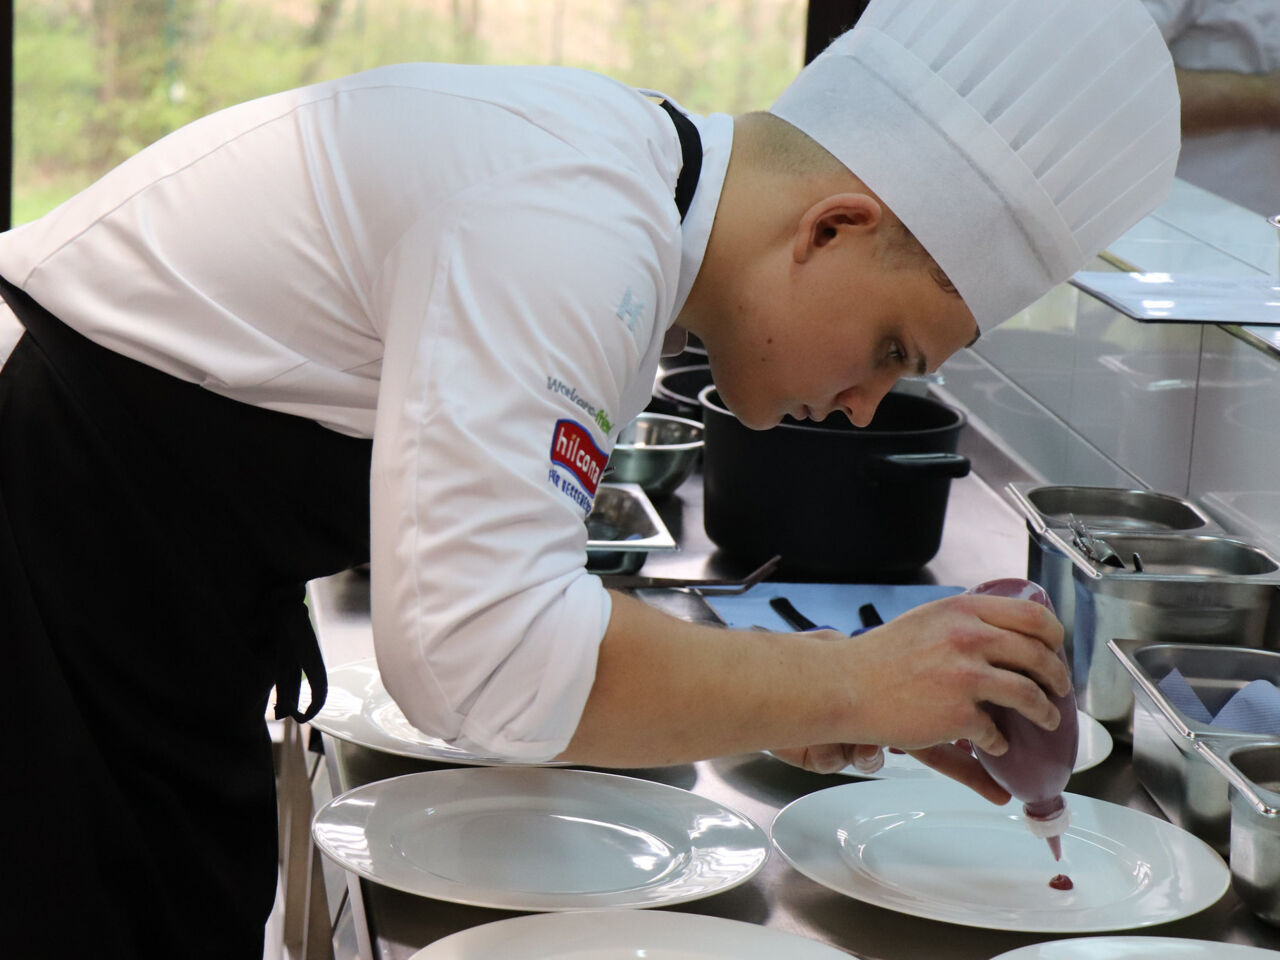 Germany’s young chefs get a taste for digital competition